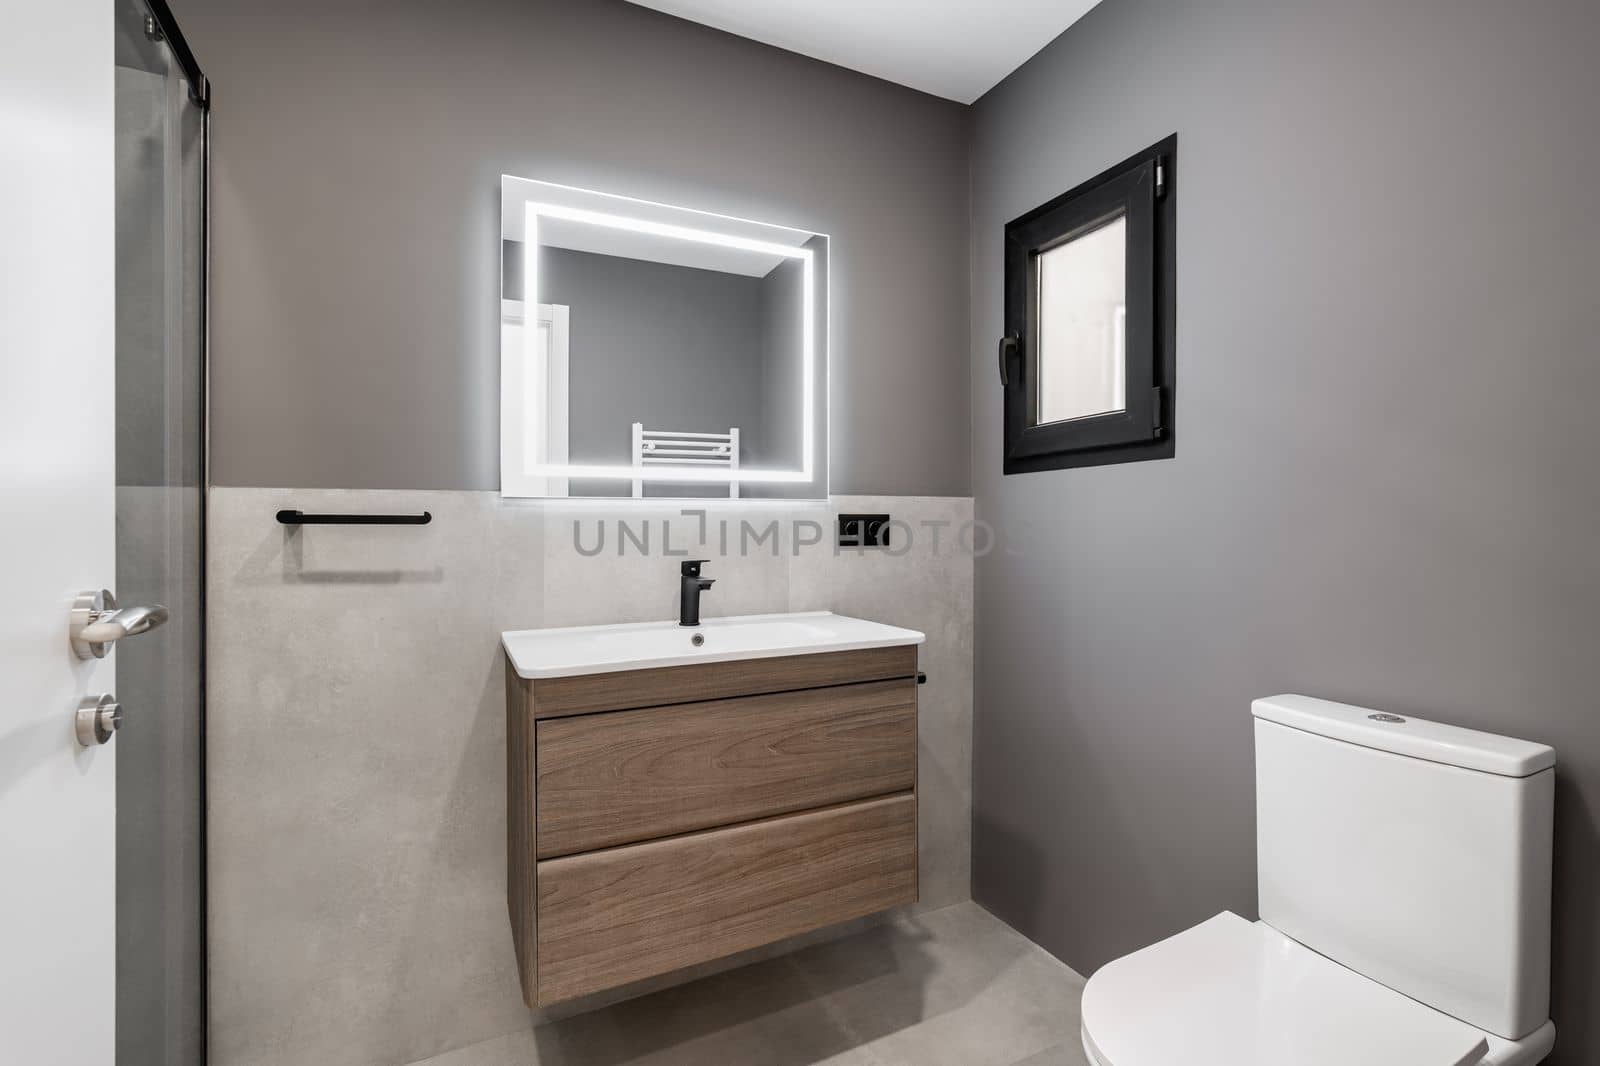 Part of the bathroom in gray and white pastel colors with a matte white ceiling. Sink on a wooden countertop with drawers. On the tiled floor against the wall is a white toilet with a closed lid